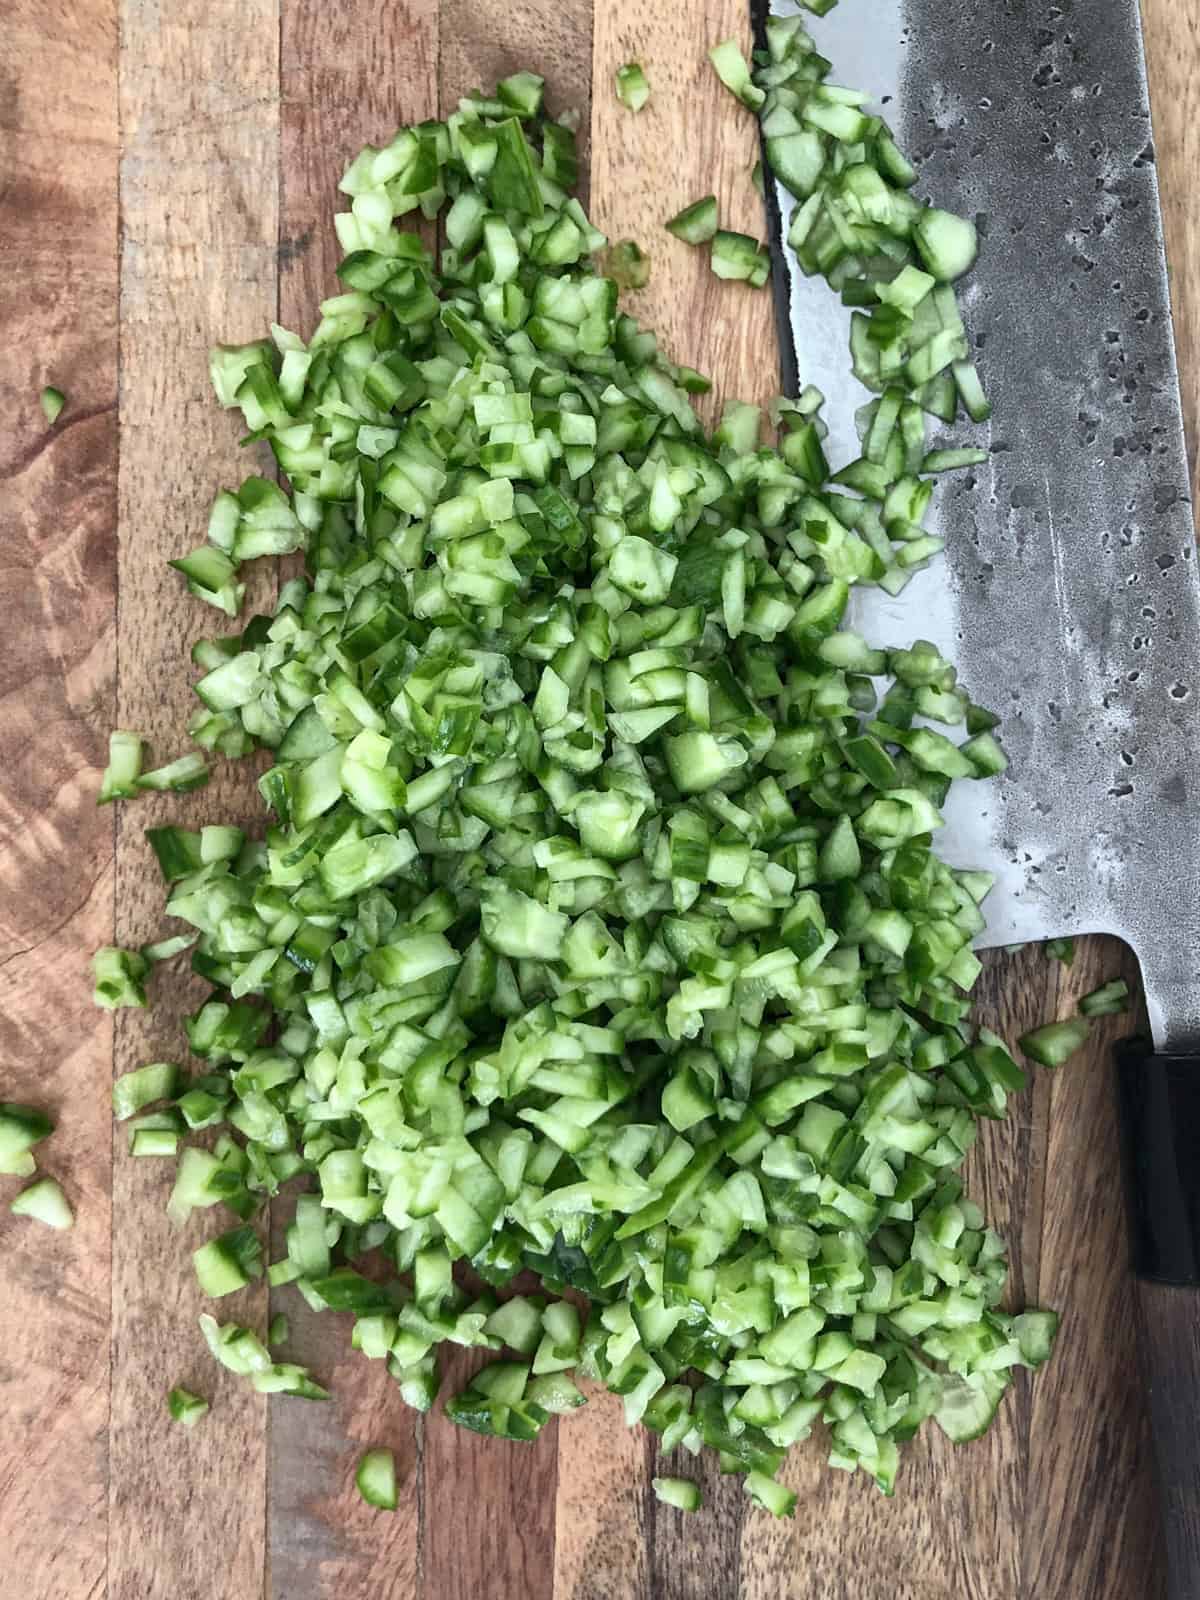 Diced cucumbers on a cutting board with a knife.